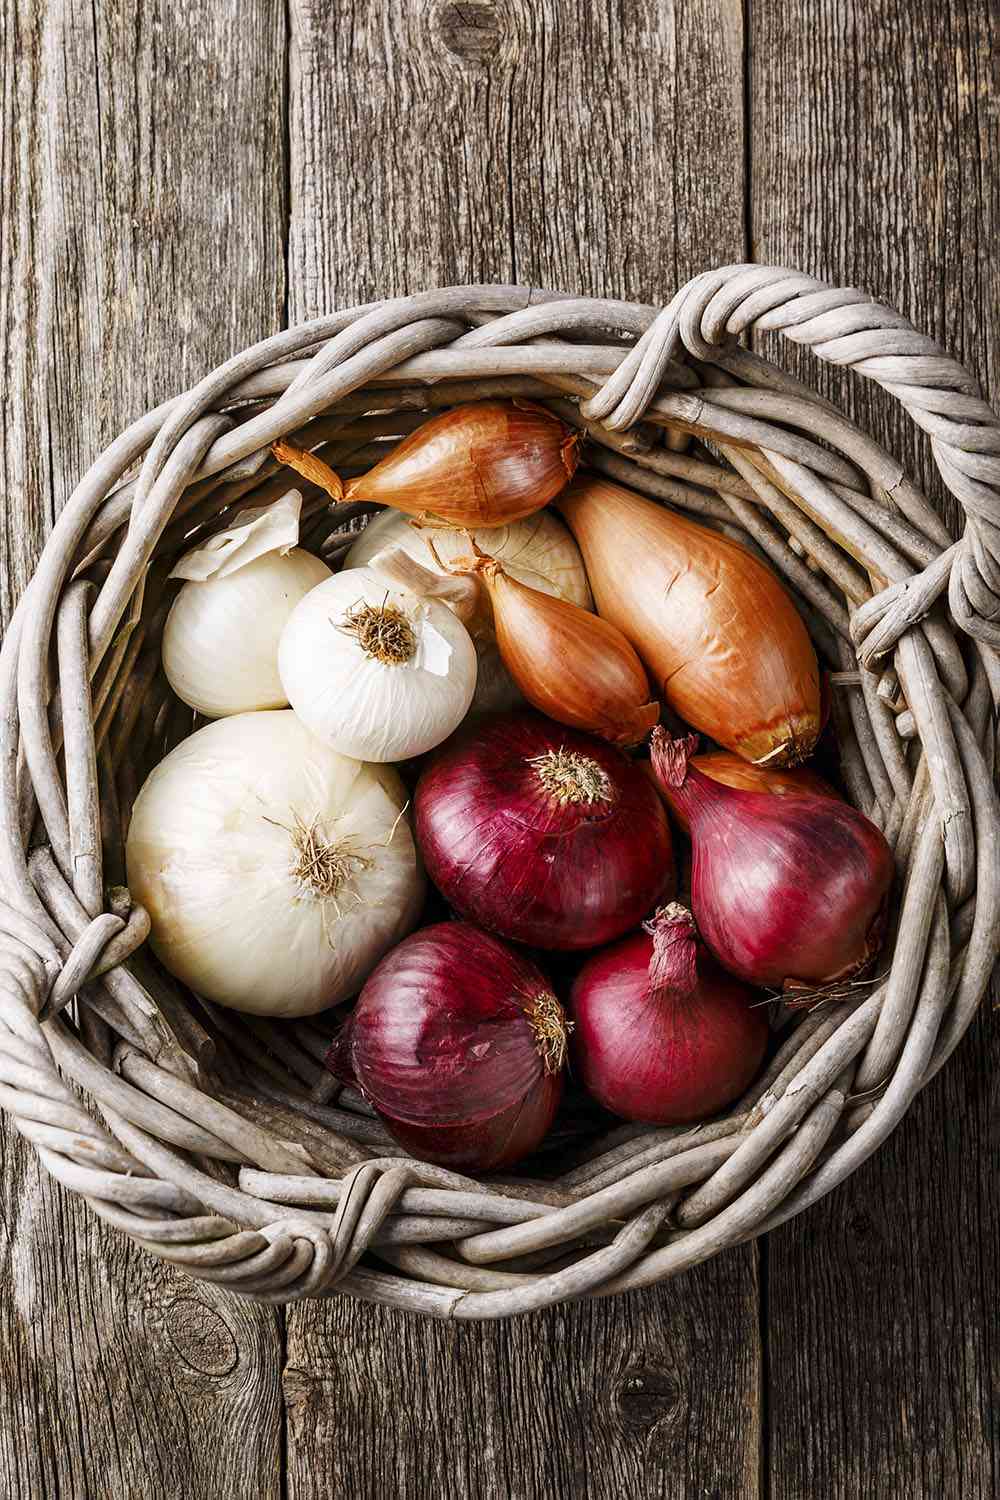 Different types of onions in basket on wooden background